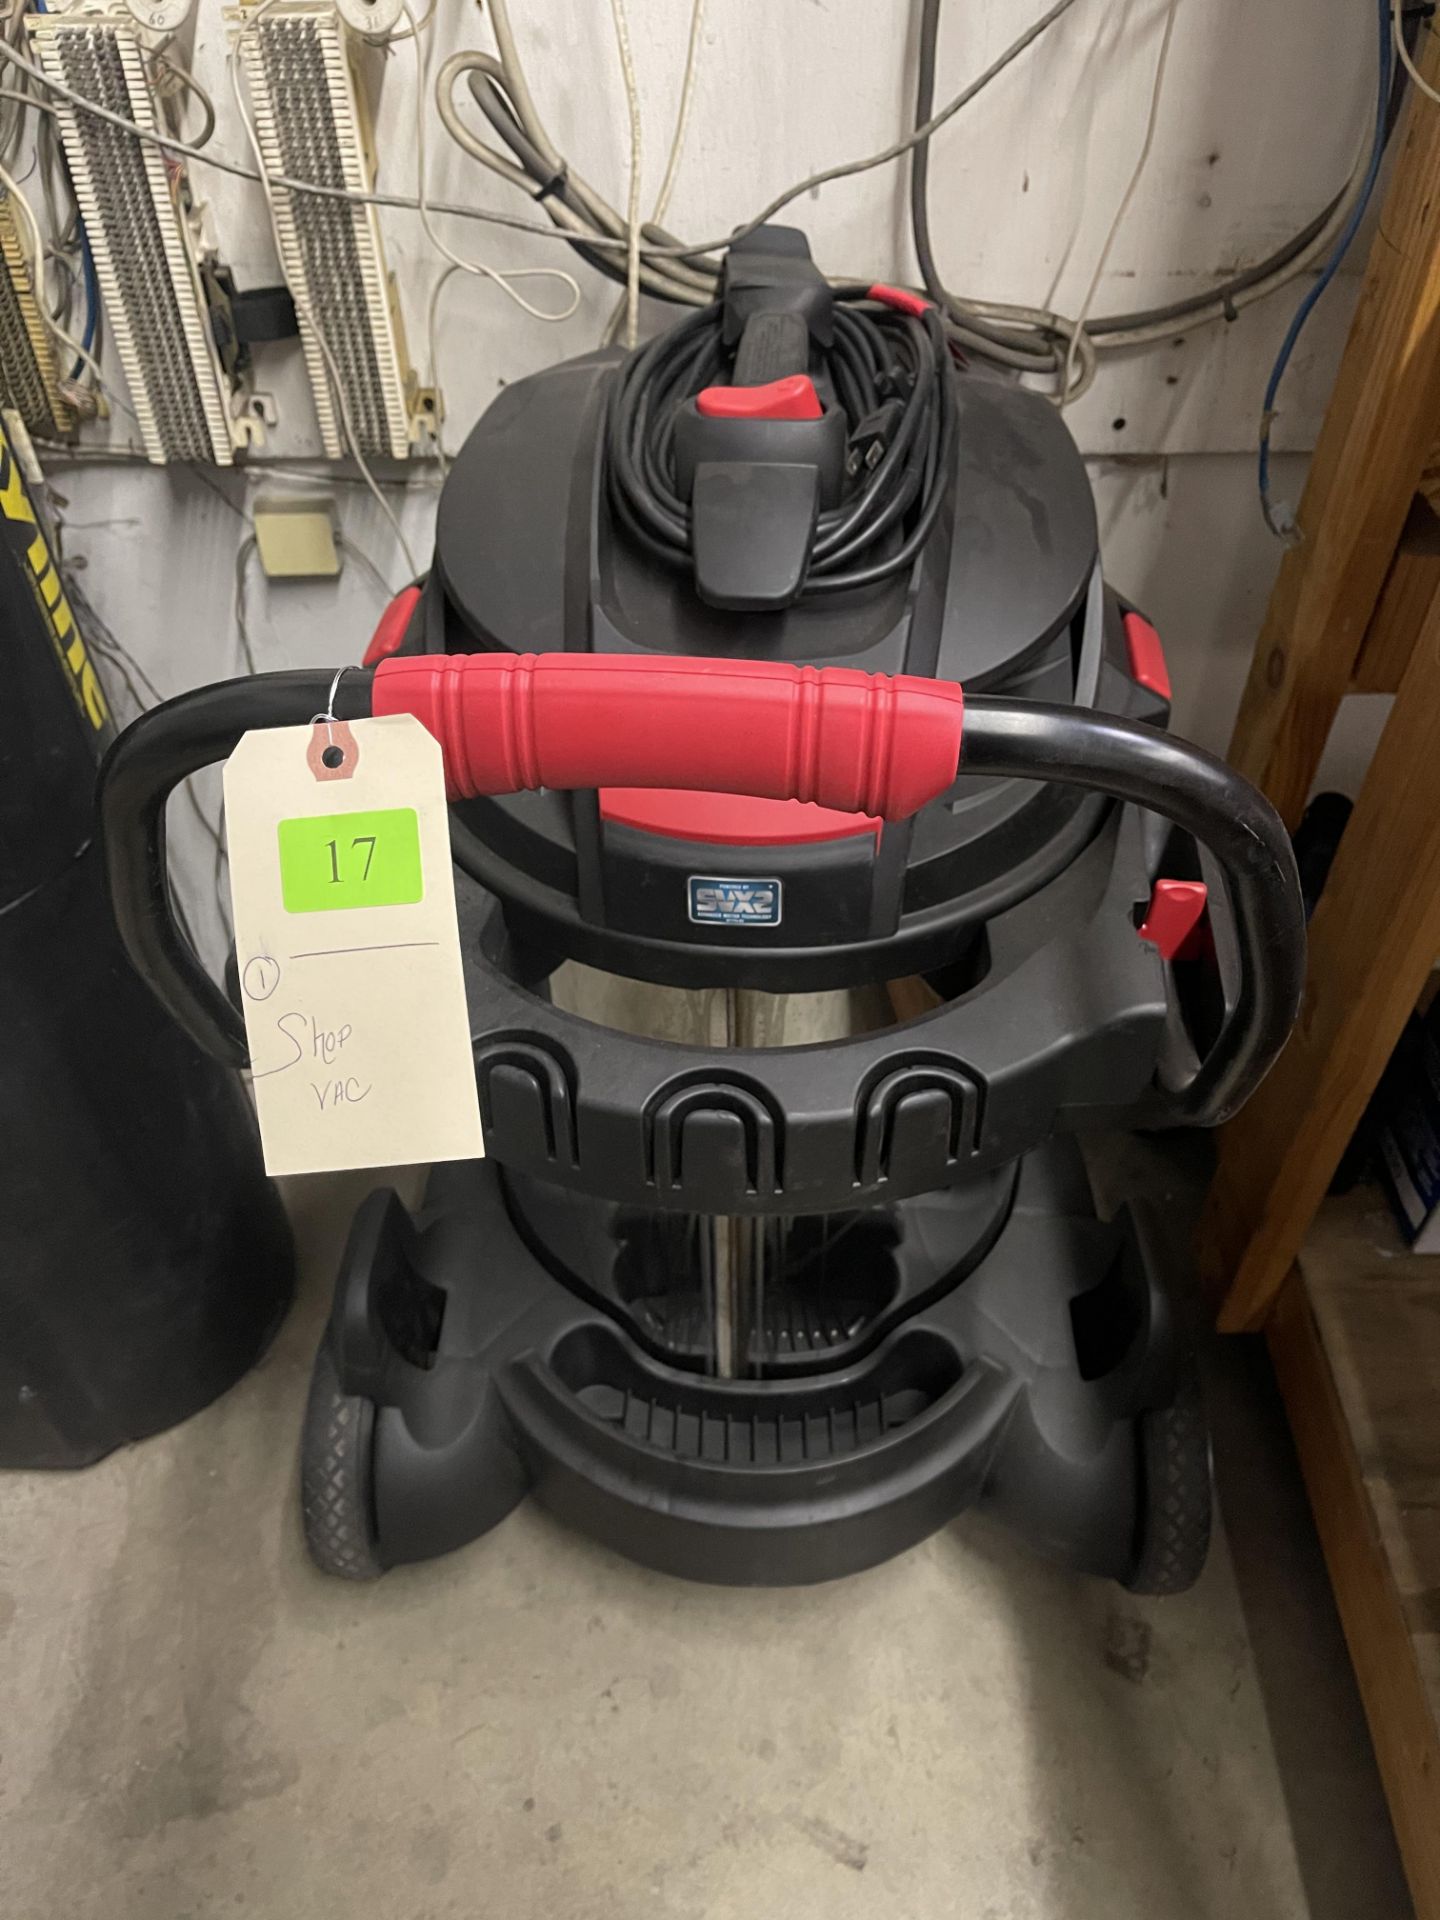 SHOP VAC WITH ACCESSORIES